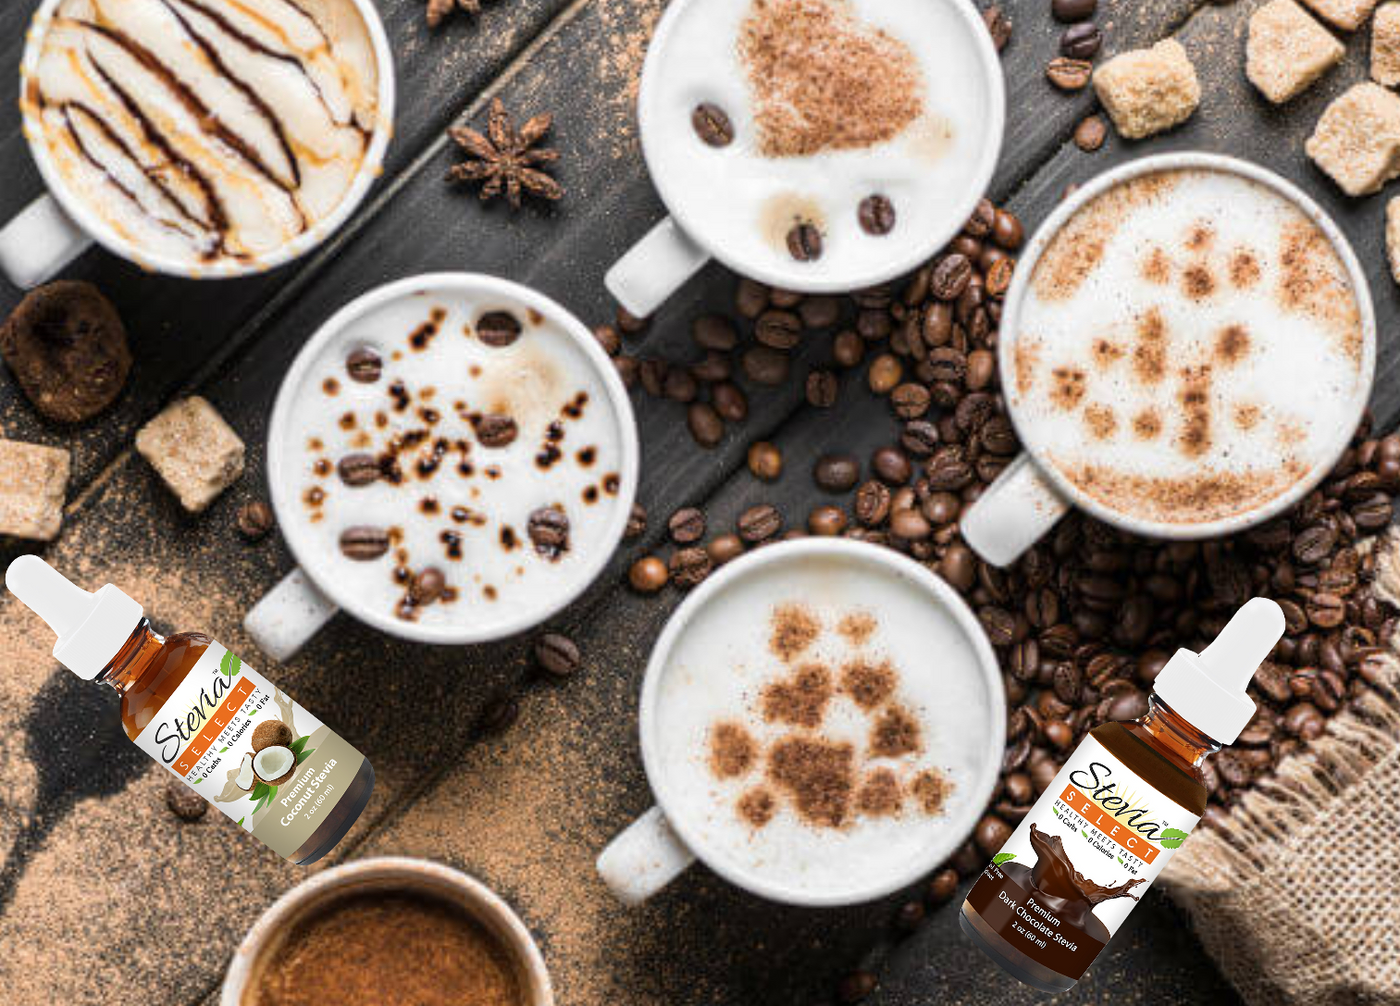 stevia select Keto sugar-free coffee flavors. Pure stevia and stevia flavors. sugar free keto coffee sweeteners. diabetic friendly and will not effect glycemic levels. Keto coffee sweeteners all natural sugar substitute.